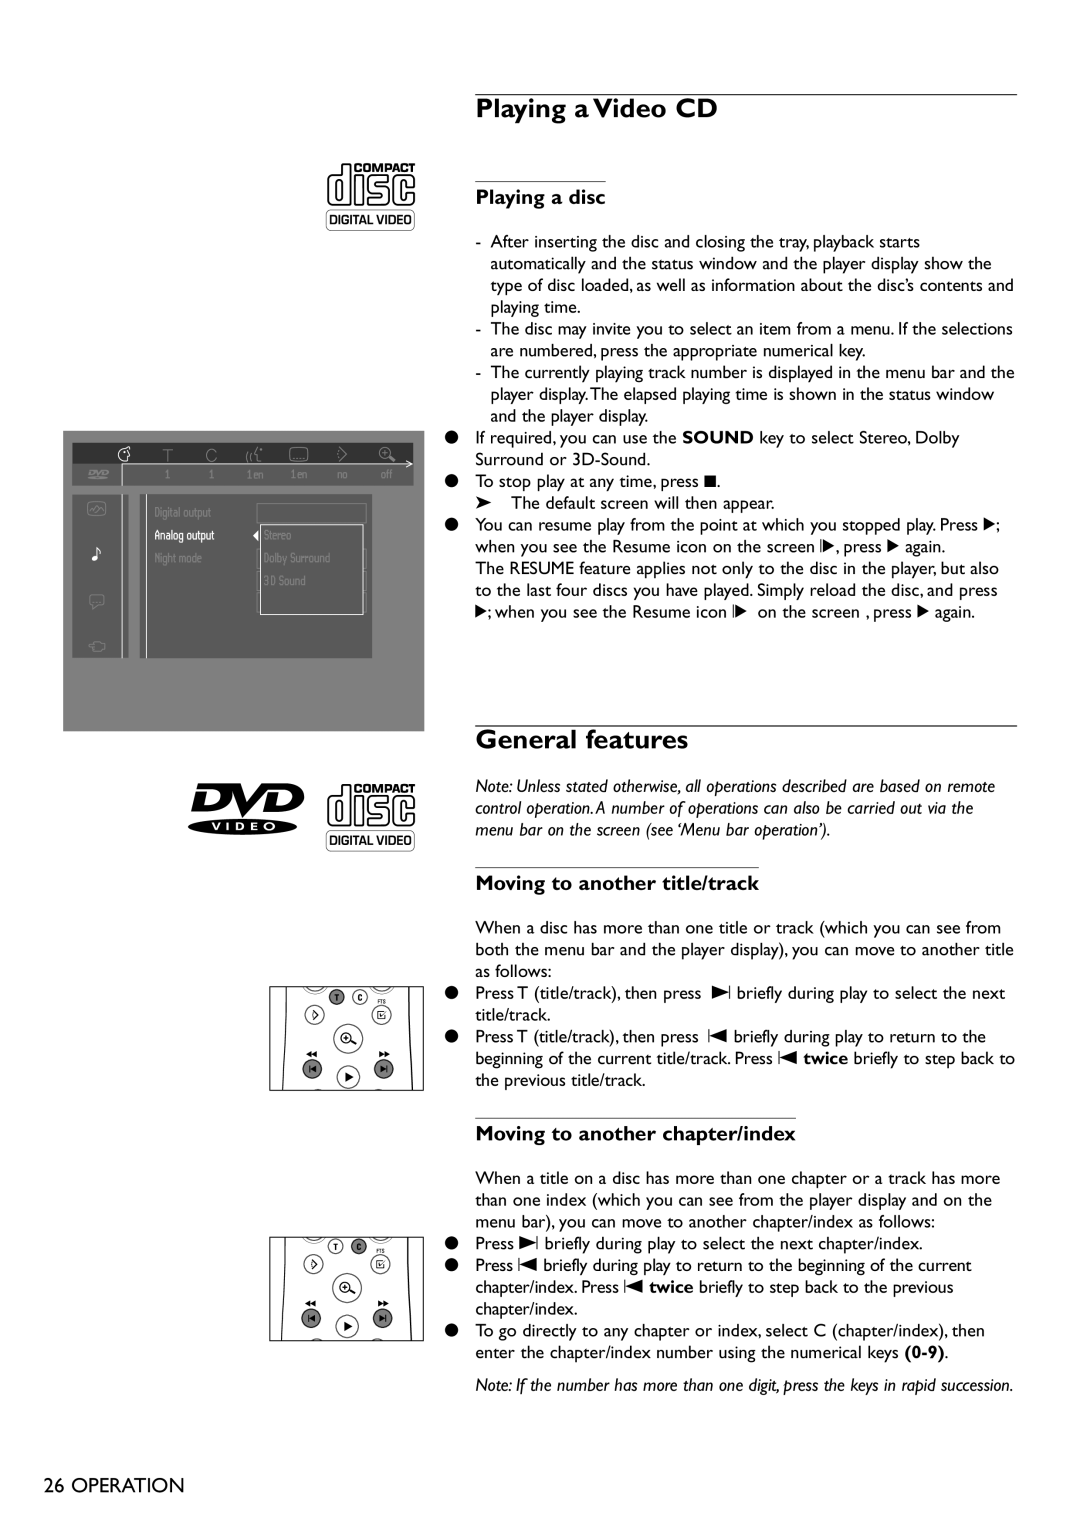 Philips DVD751 manual Playing a Video CD, General features, Playing a disc, Moving to another title/track, Operation 